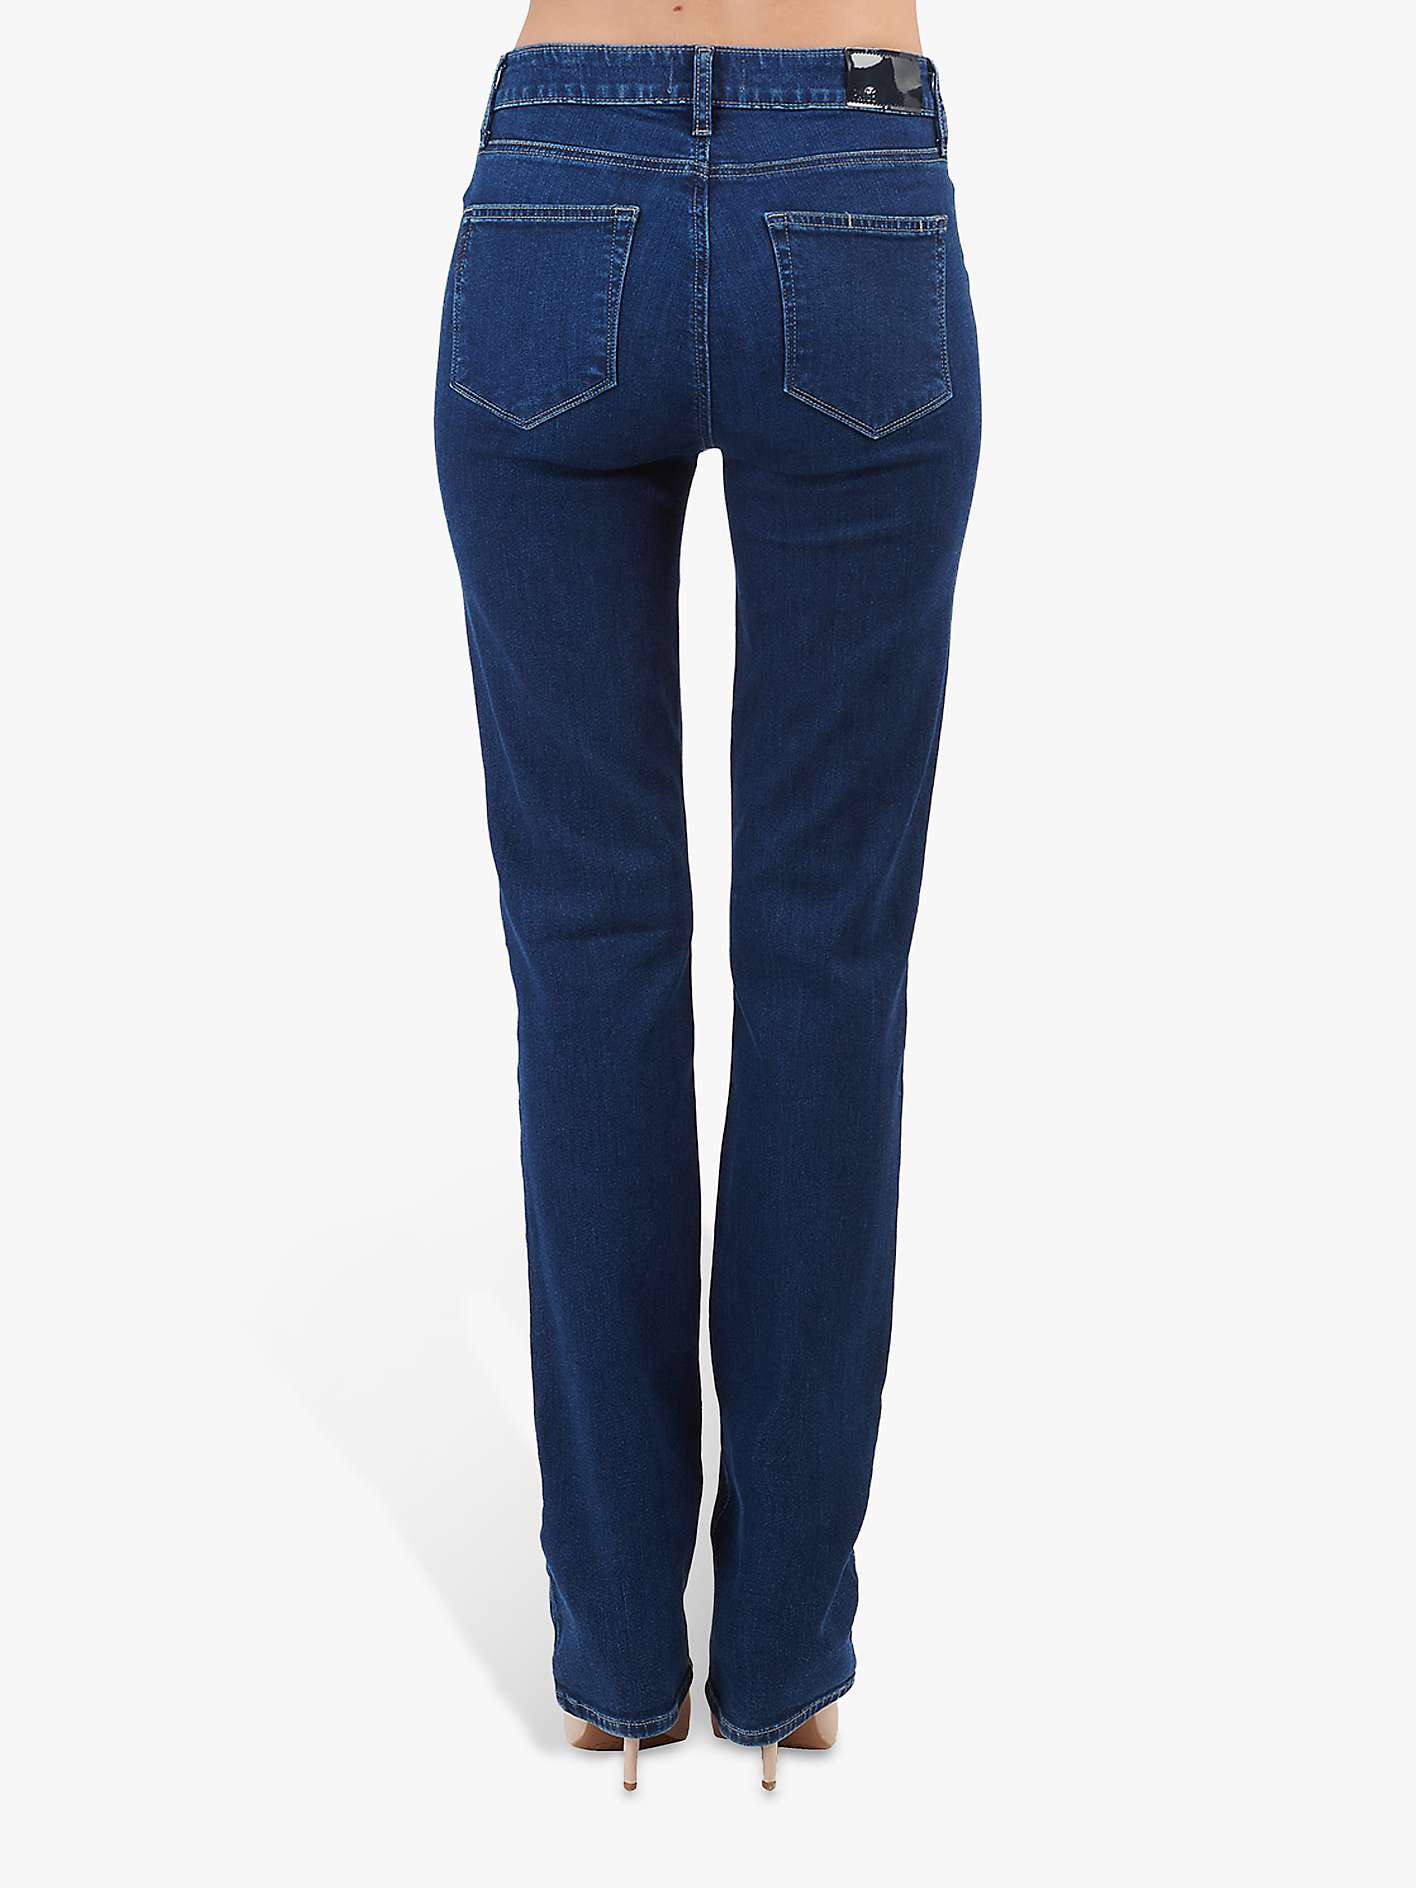 Buy PAIGE Hoxton High Rise Straight Leg Jeans, Brentwood Mid Wash Online at johnlewis.com